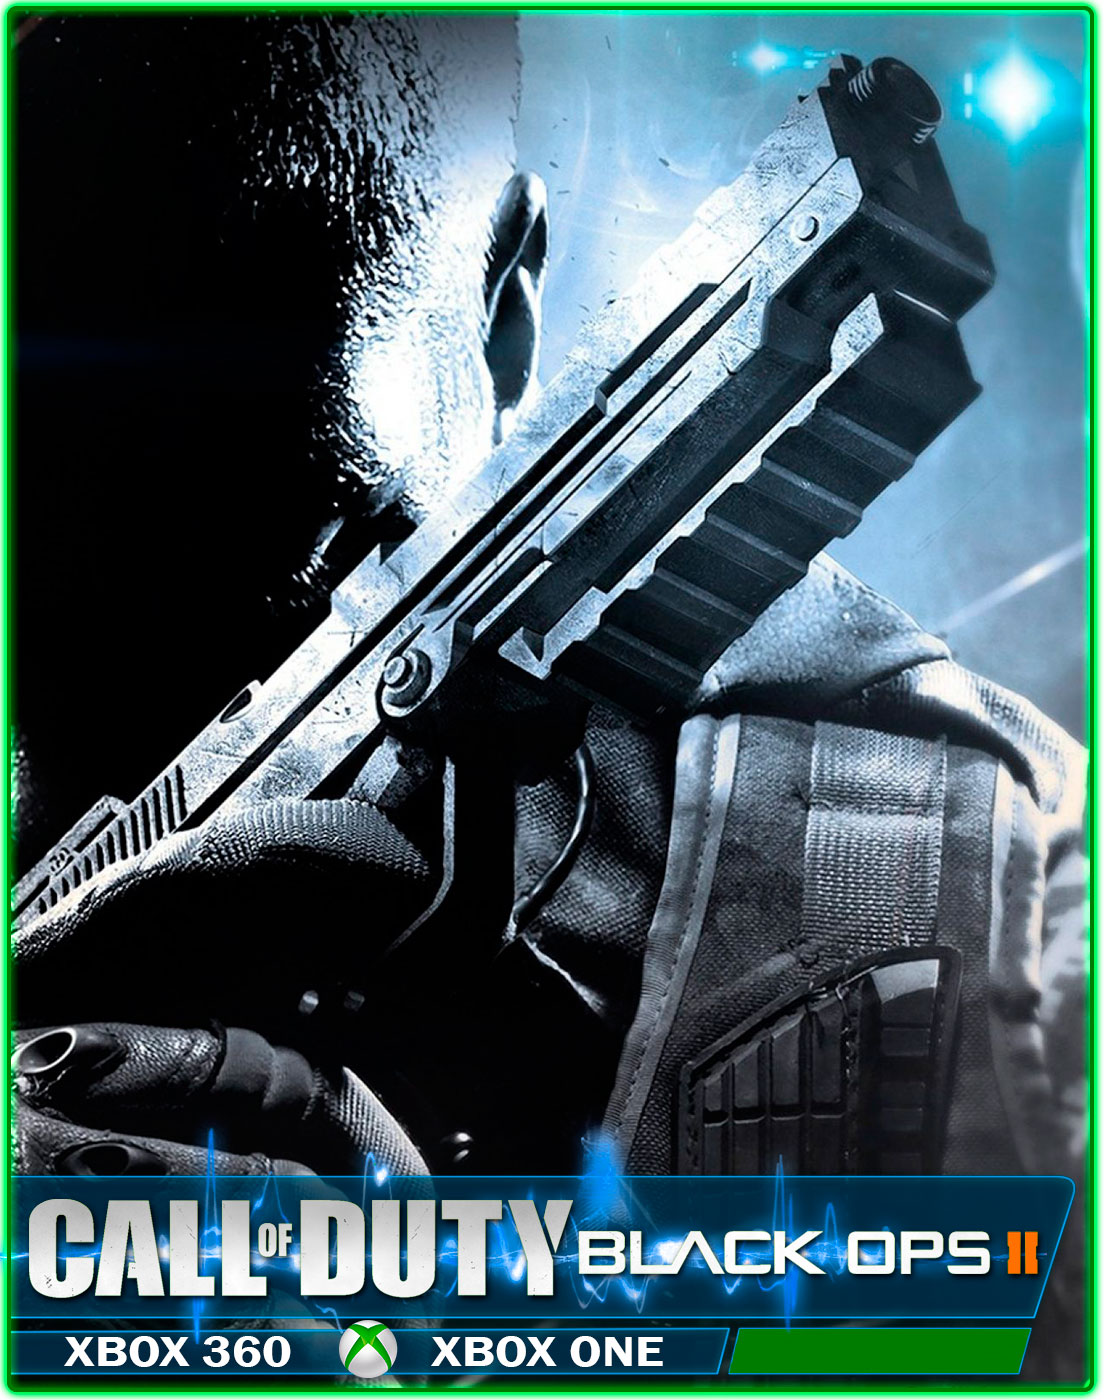 buy-call-of-duty-black-ops-2-xbox-360-xbox-one-and-download